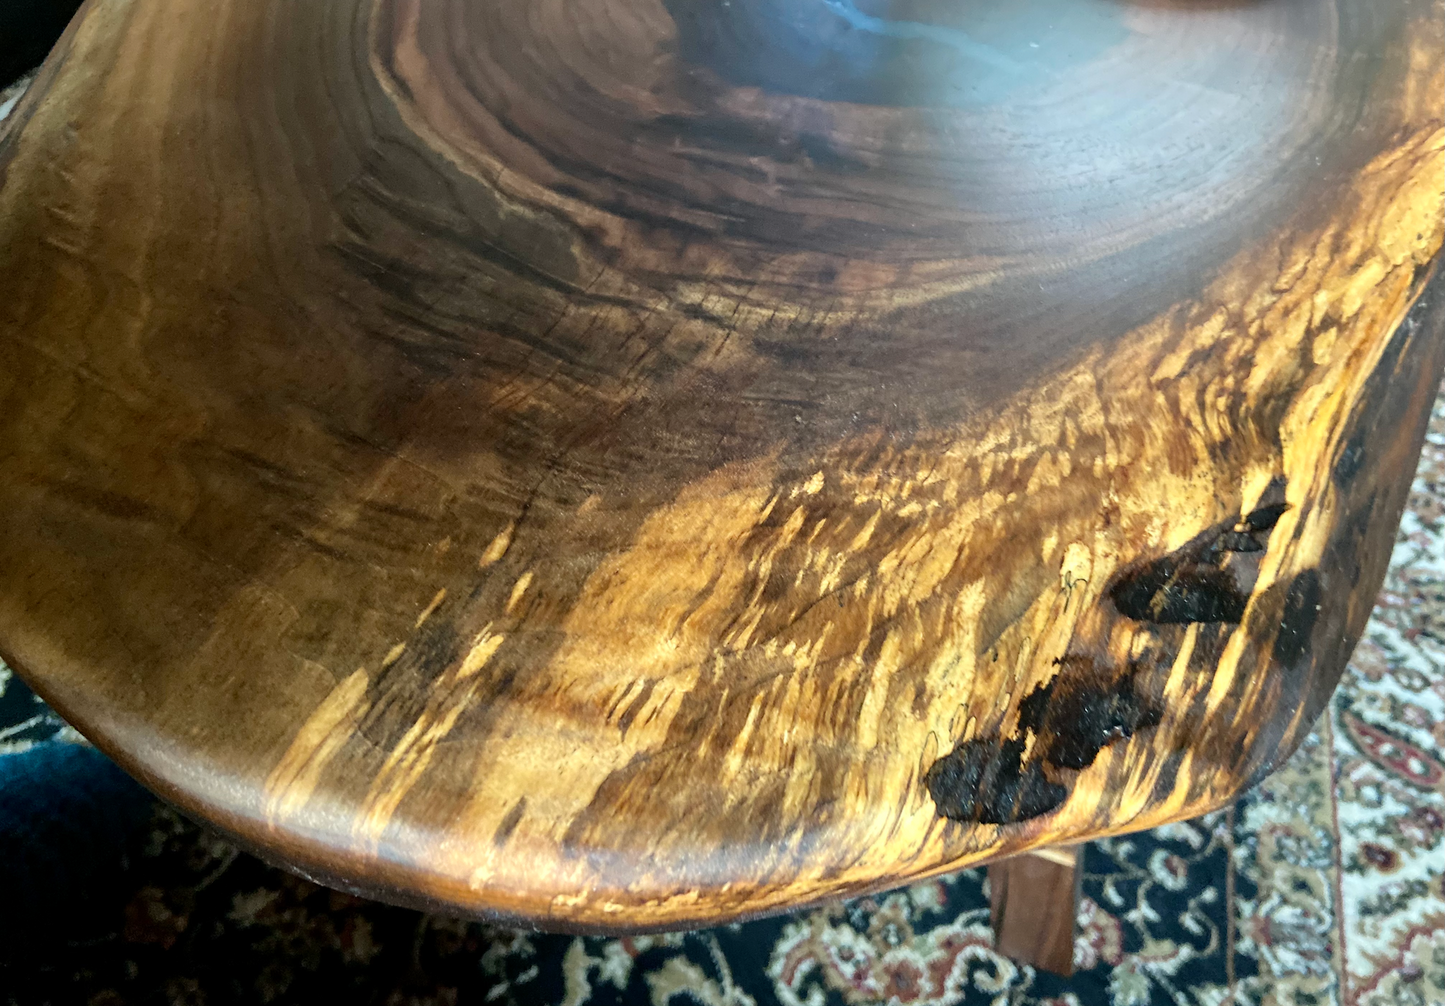 Ultra unique oval rustic natural live edge black walnut coffee table offers natural walnut wood with gorgeous grain patterns, complete with a large knot, a smaller knot, radial grain dancing around the entire table, completed with curl and a long oval shape.